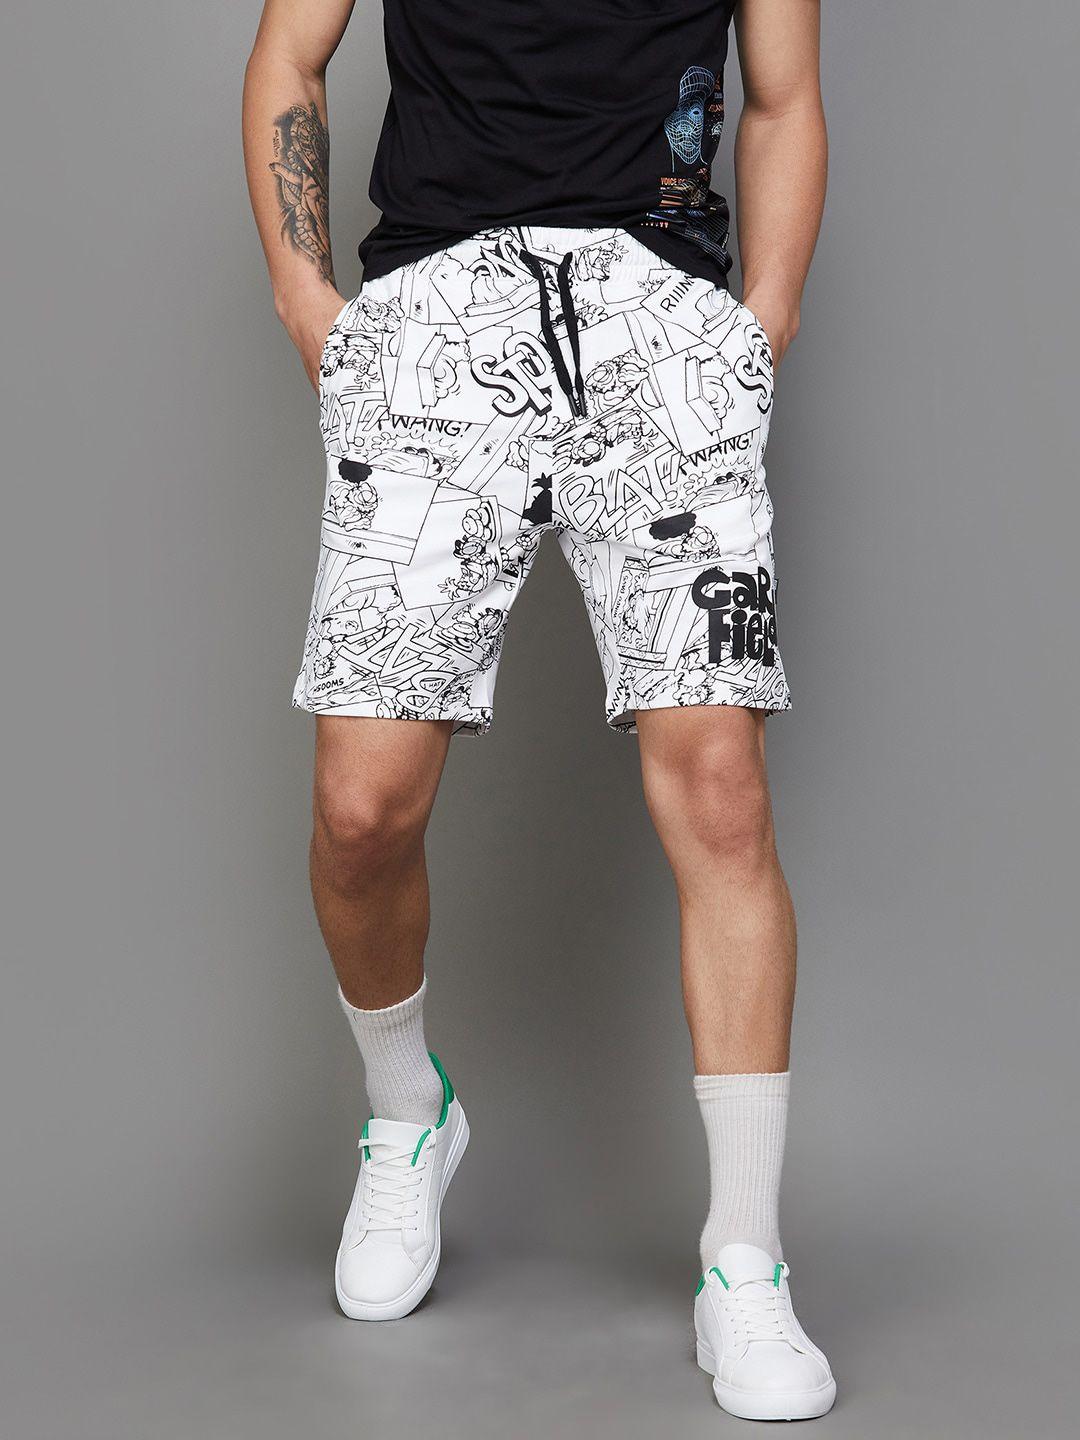 fame-forever-by-lifestyle-men-garfield-printed-cotton-regular-shorts